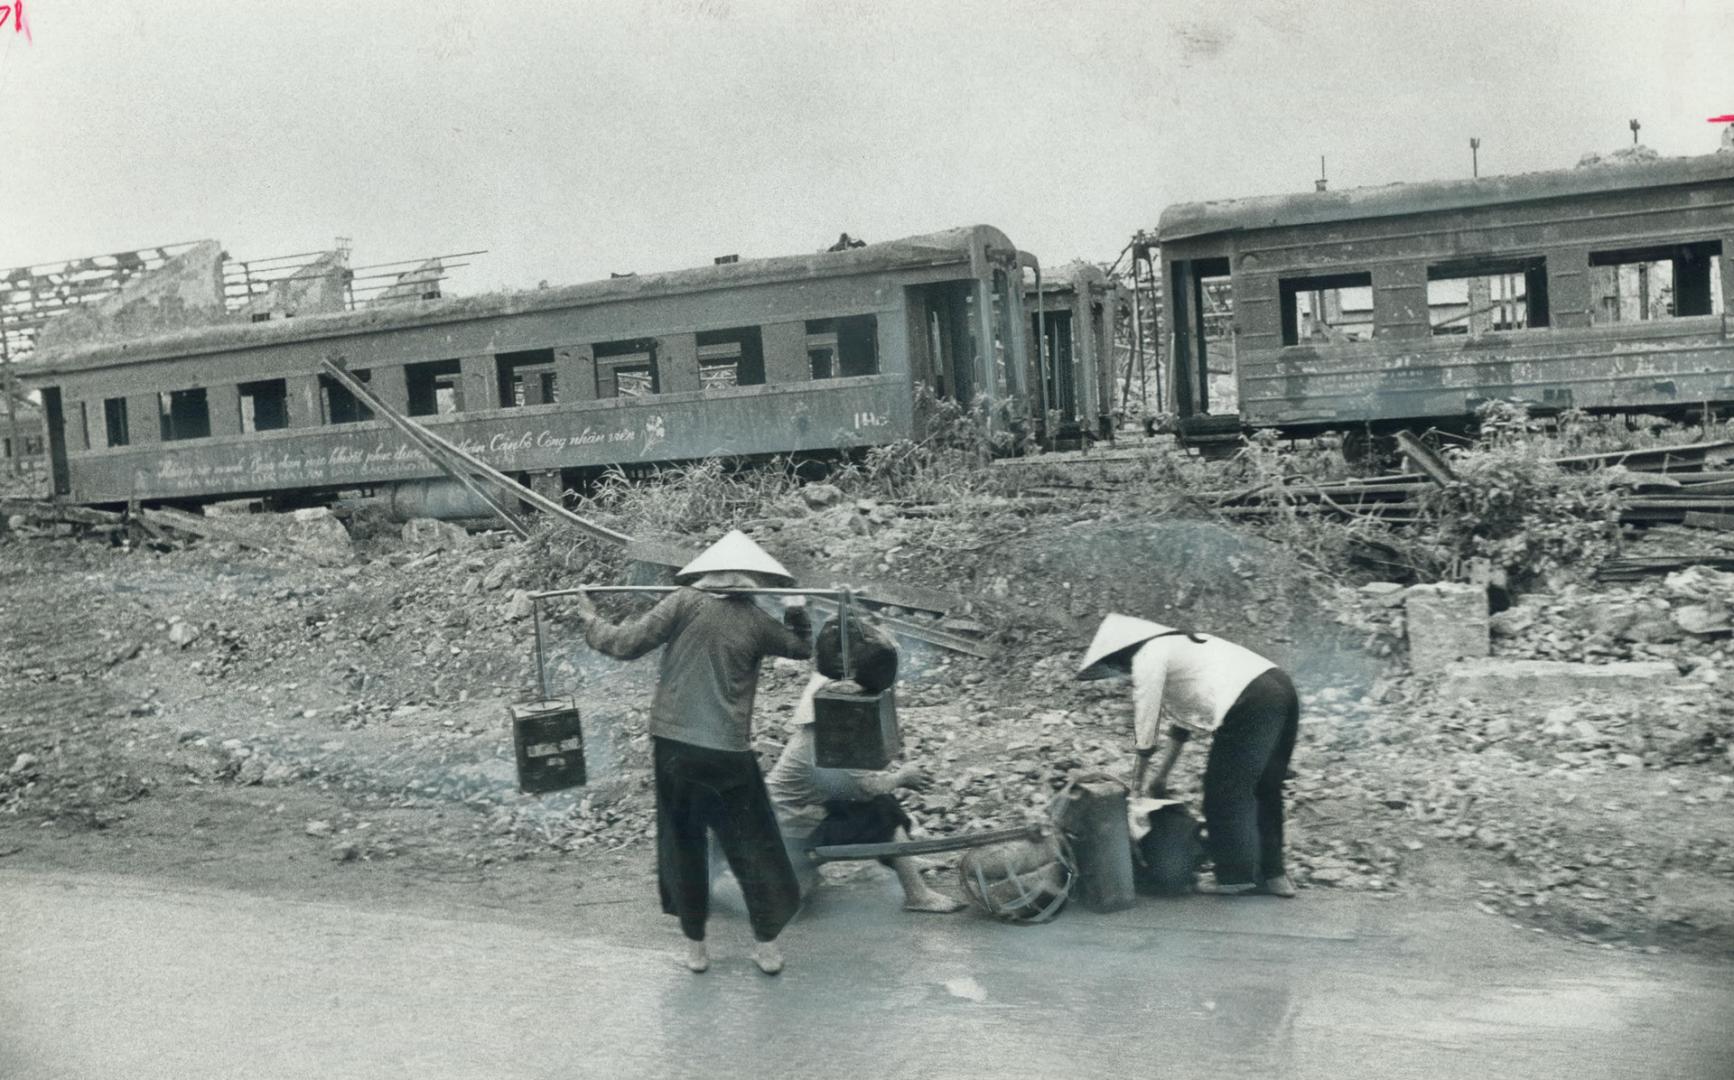 The railway yard and repair shops in Hanoi were hit by what the U